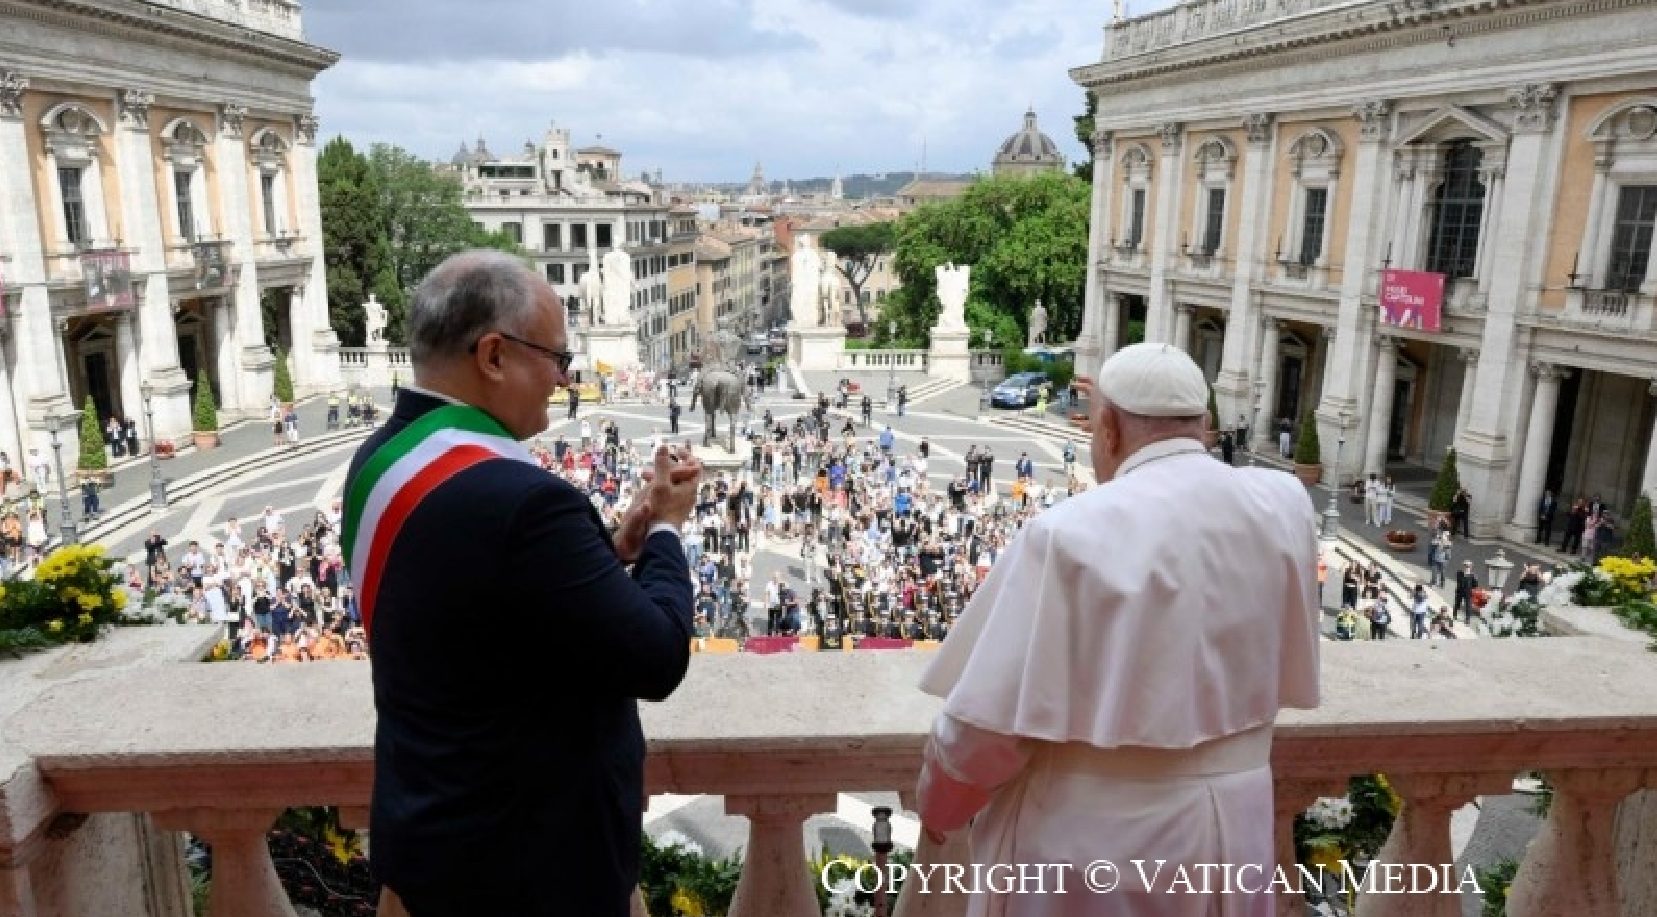 Pope Francis on the occasion of his visit to the mayor